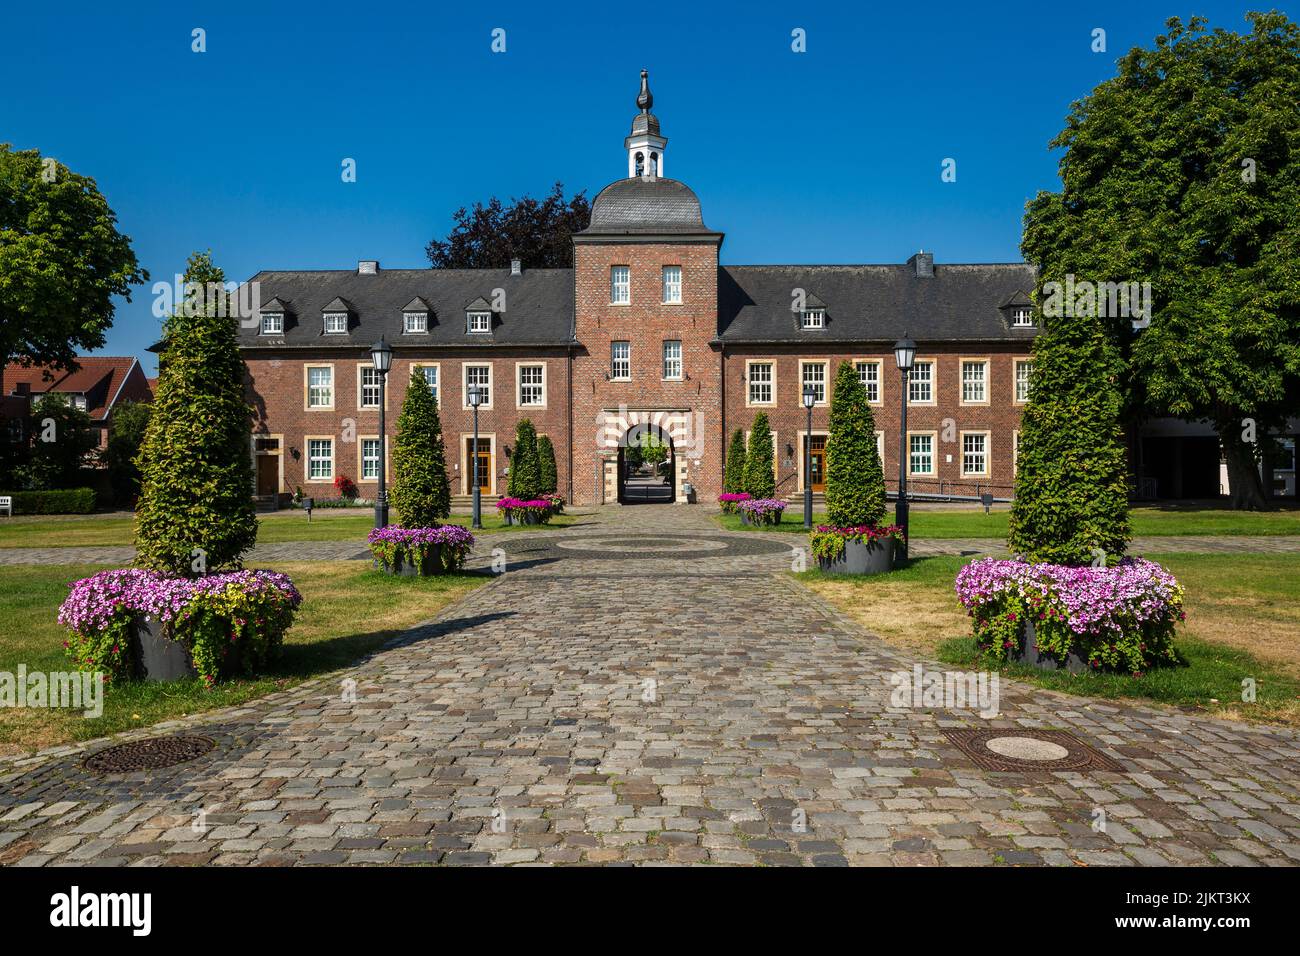 Germany, Ahaus, Westmuensterland, Muensterland, Westphalia, North Rhine-Westphalia, NRW, Ahaus District Court at the Suemmermannplatz in outer ward buildings of the Ahaus Castle, main building Stock Photo